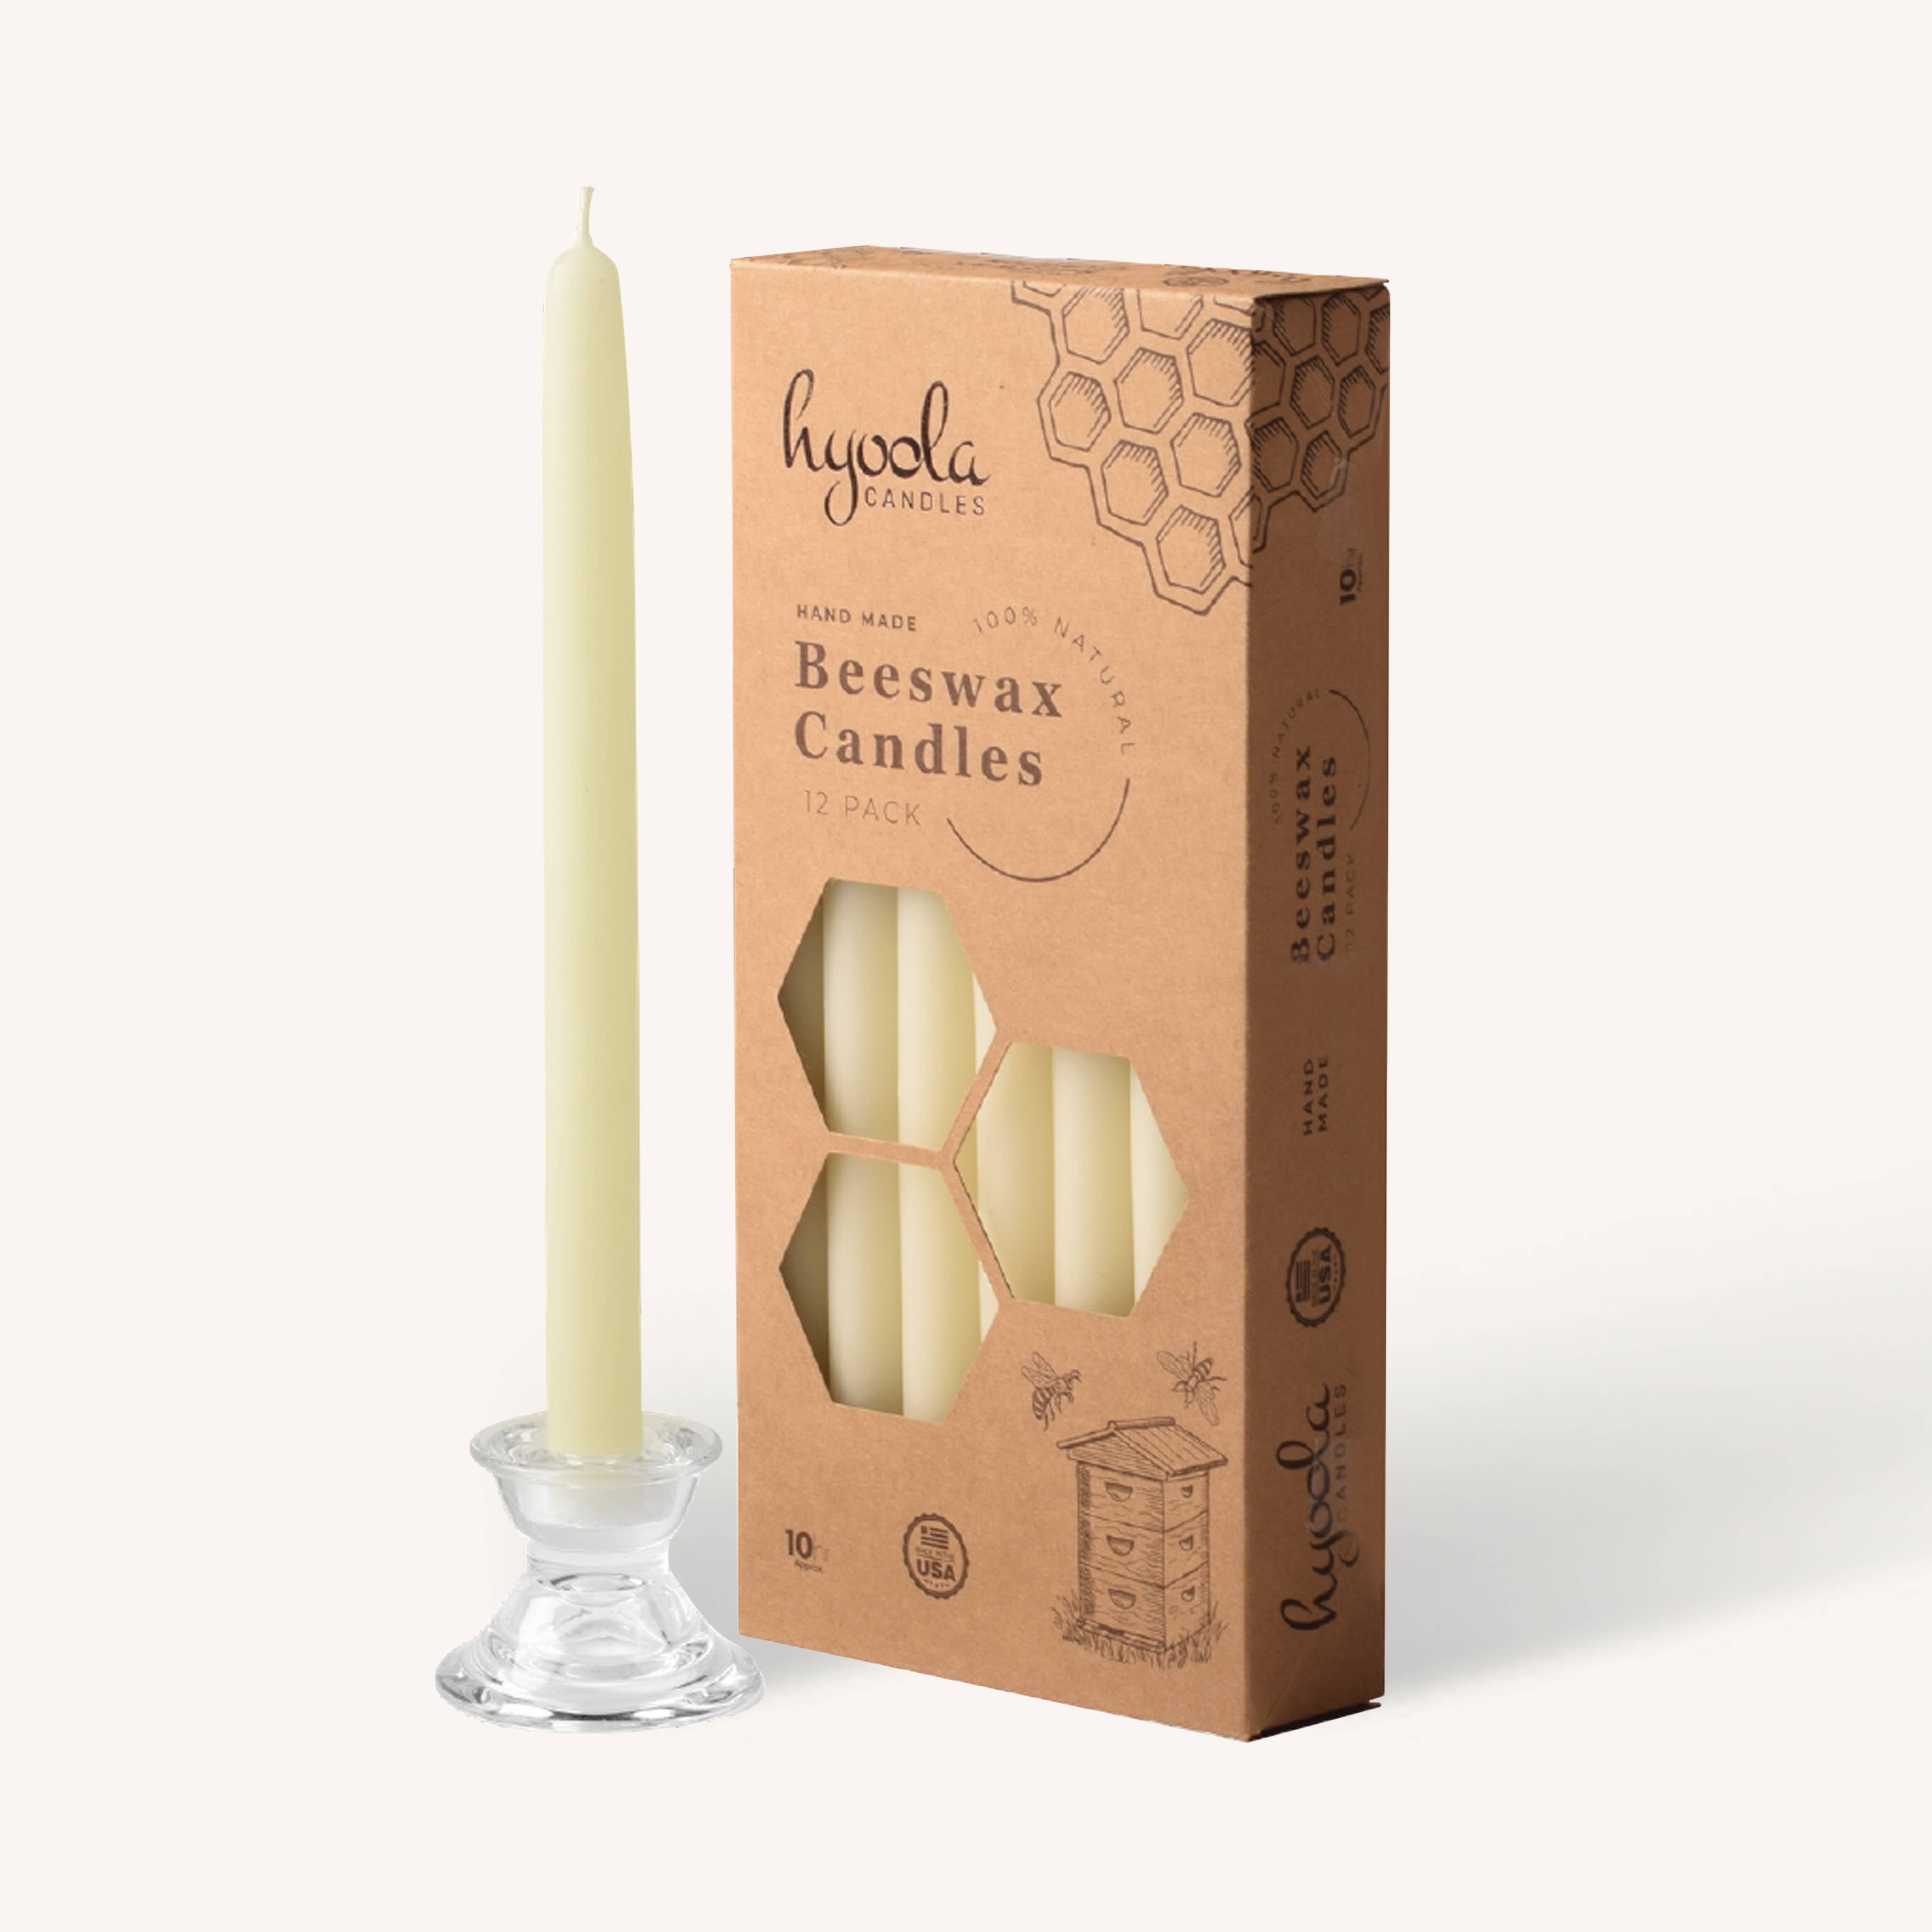 White Beeswax Candles- 10 Hours - 12 Pack